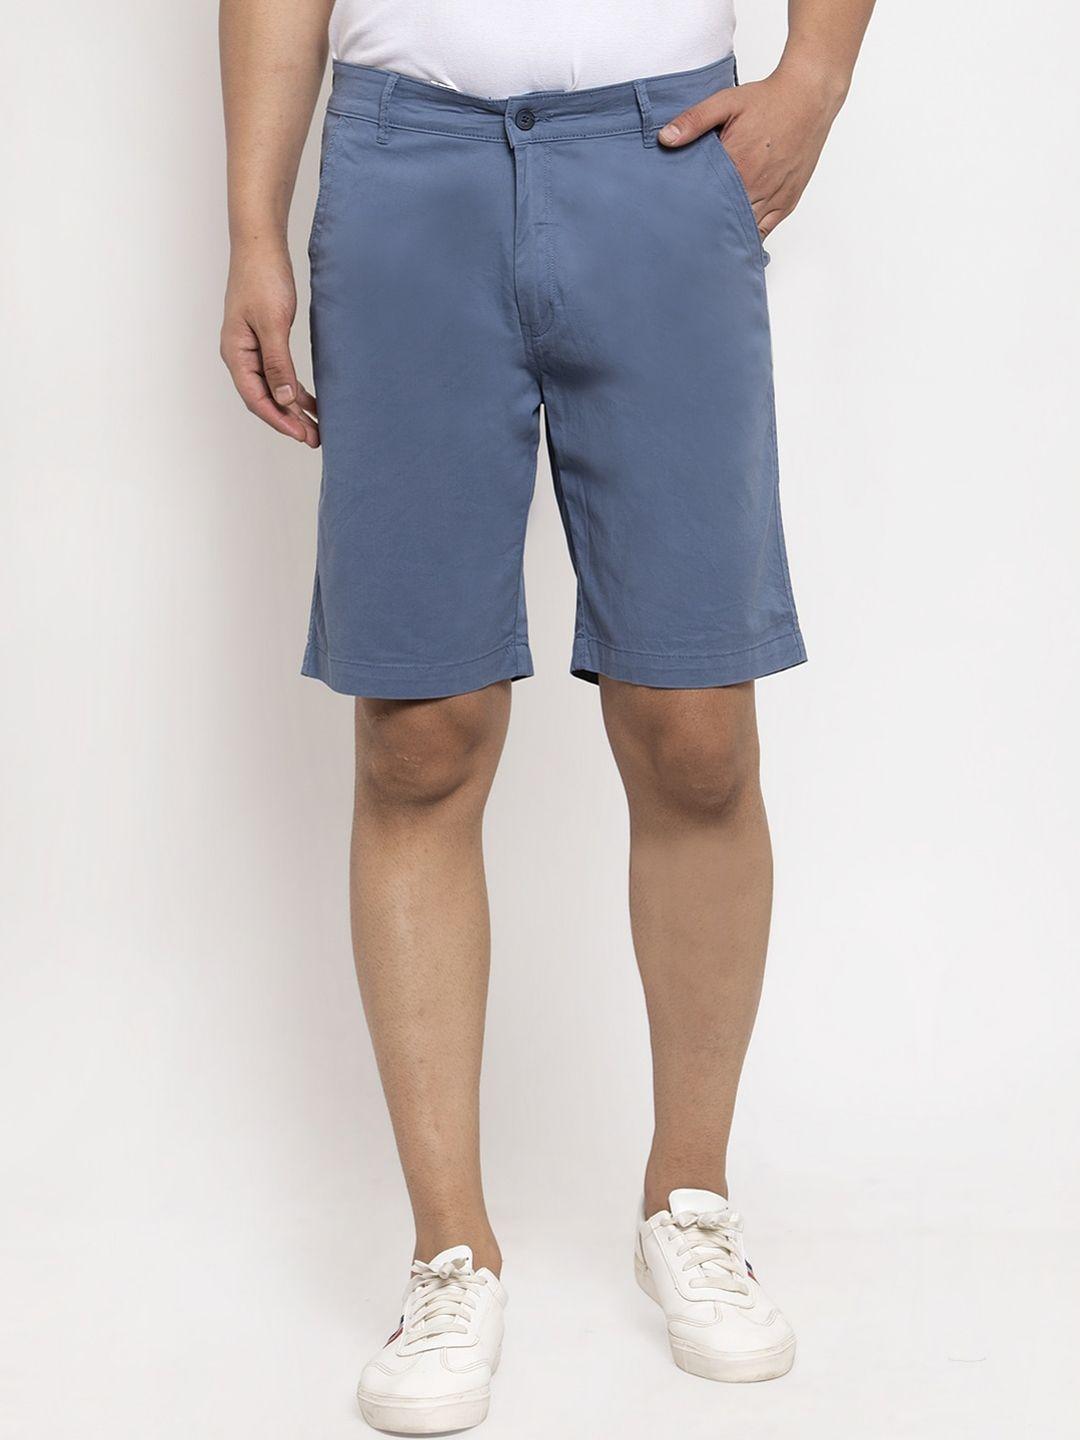 cantabil men blue solid mid-rise chinos shorts